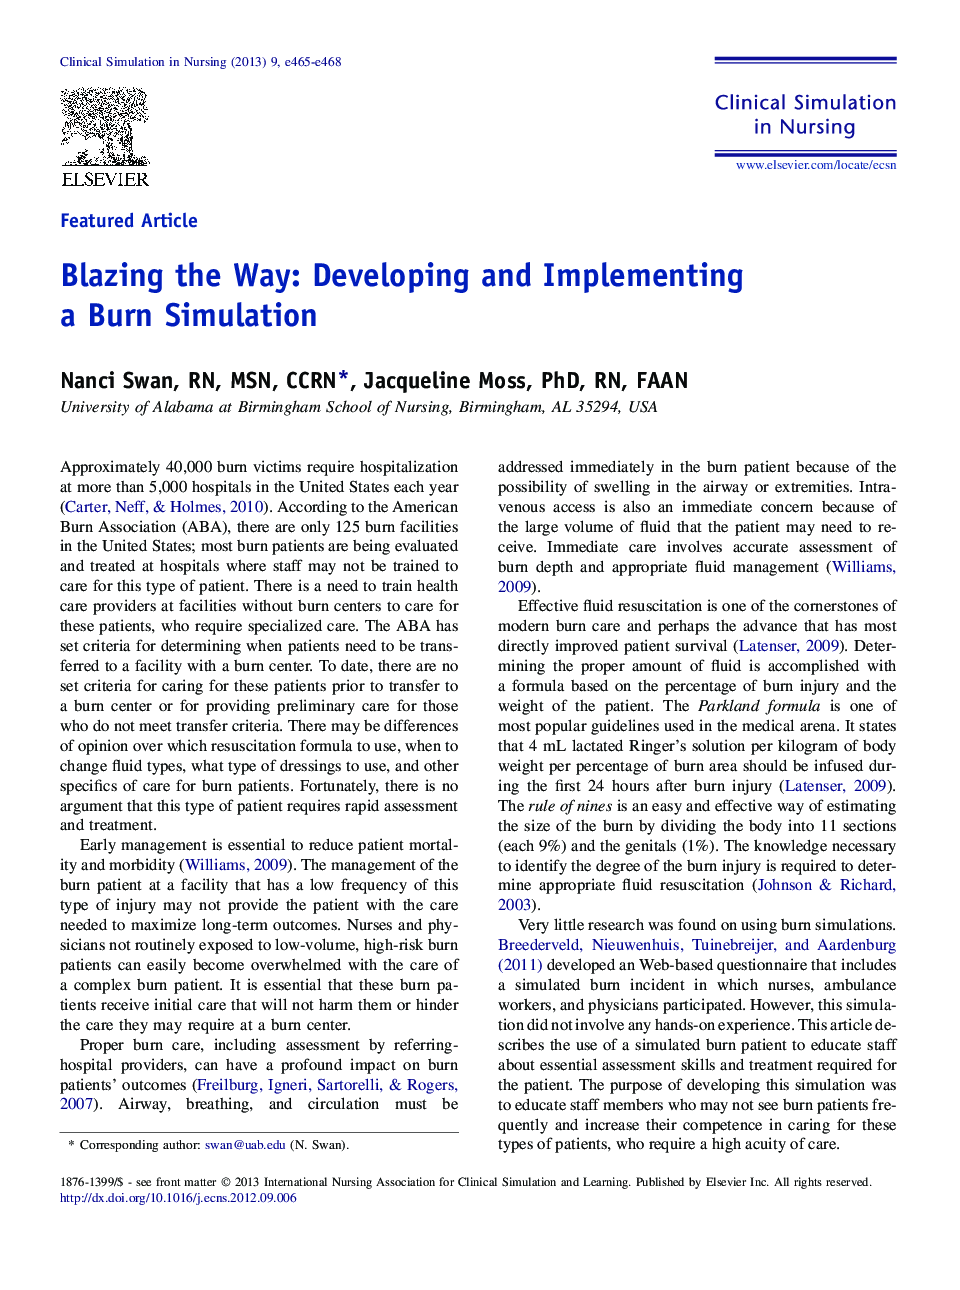 Blazing the Way: Developing and Implementing a Burn Simulation